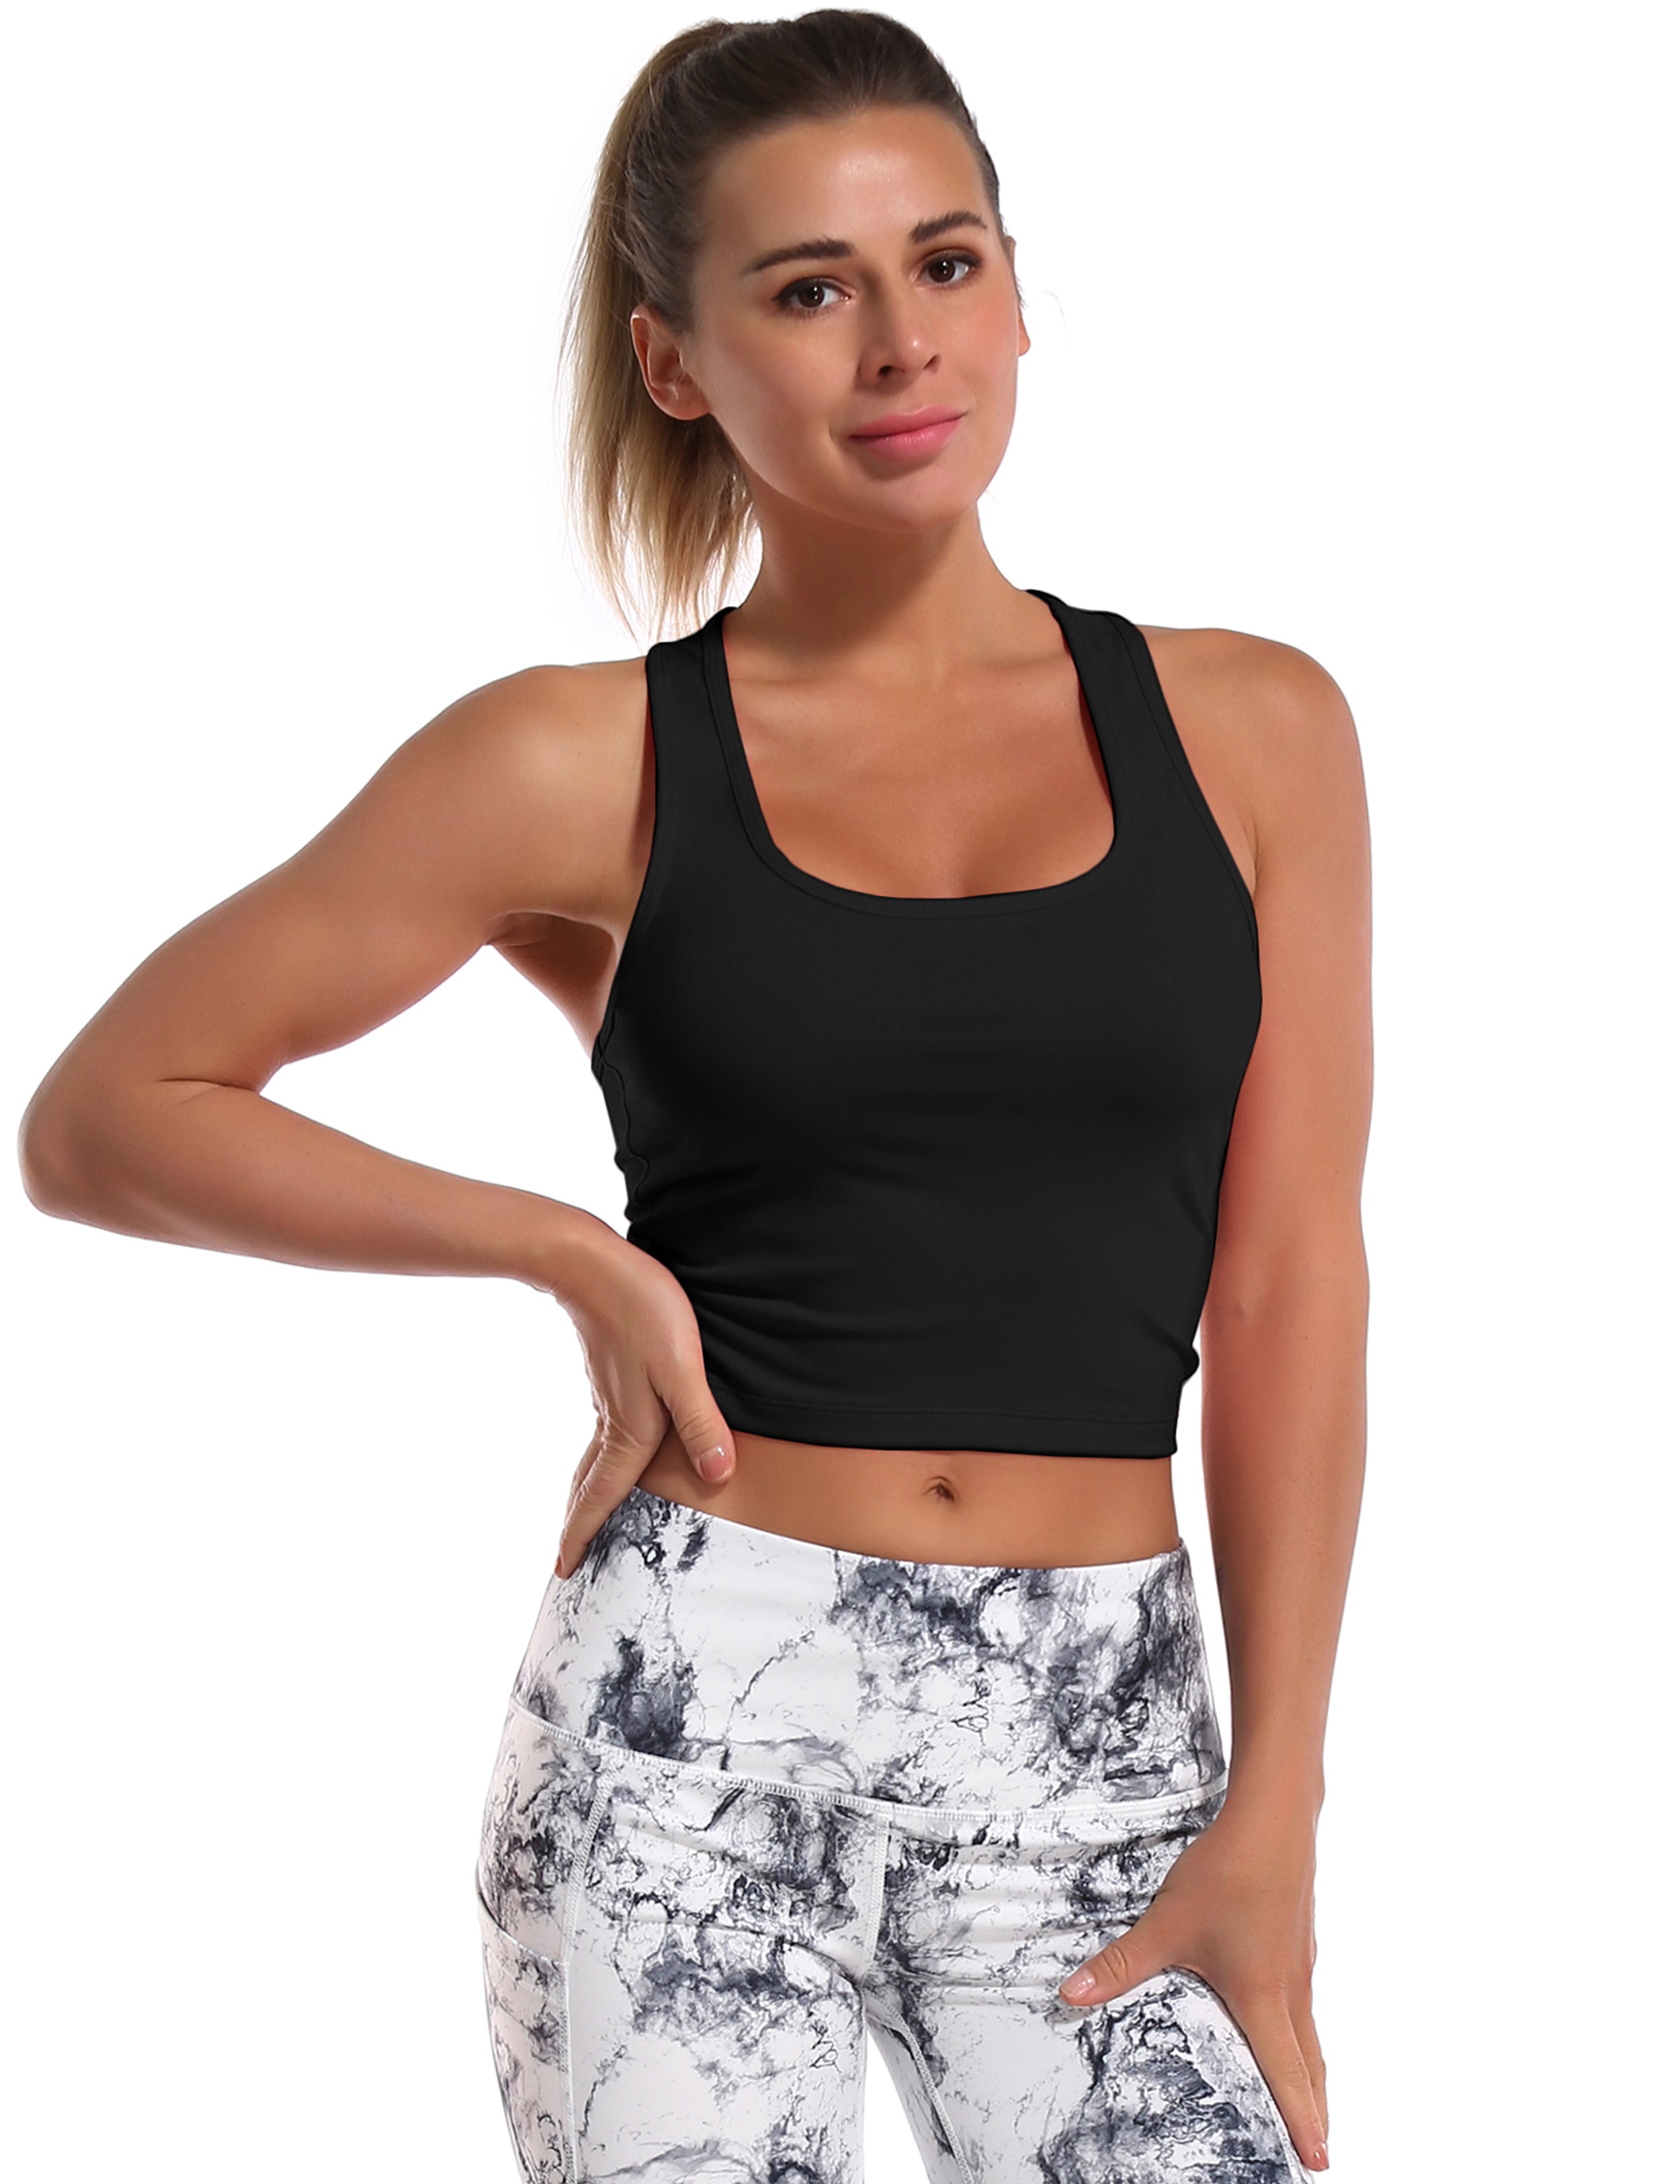 Racerback Athletic Crop Tank Tops black 92%Nylon/8%Spandex(Cotton Soft) Designed for Golf Tight Fit So buttery soft, it feels weightless Sweat-wicking Four-way stretch Breathable Contours your body Sits below the waistband for moderate, everyday coverage